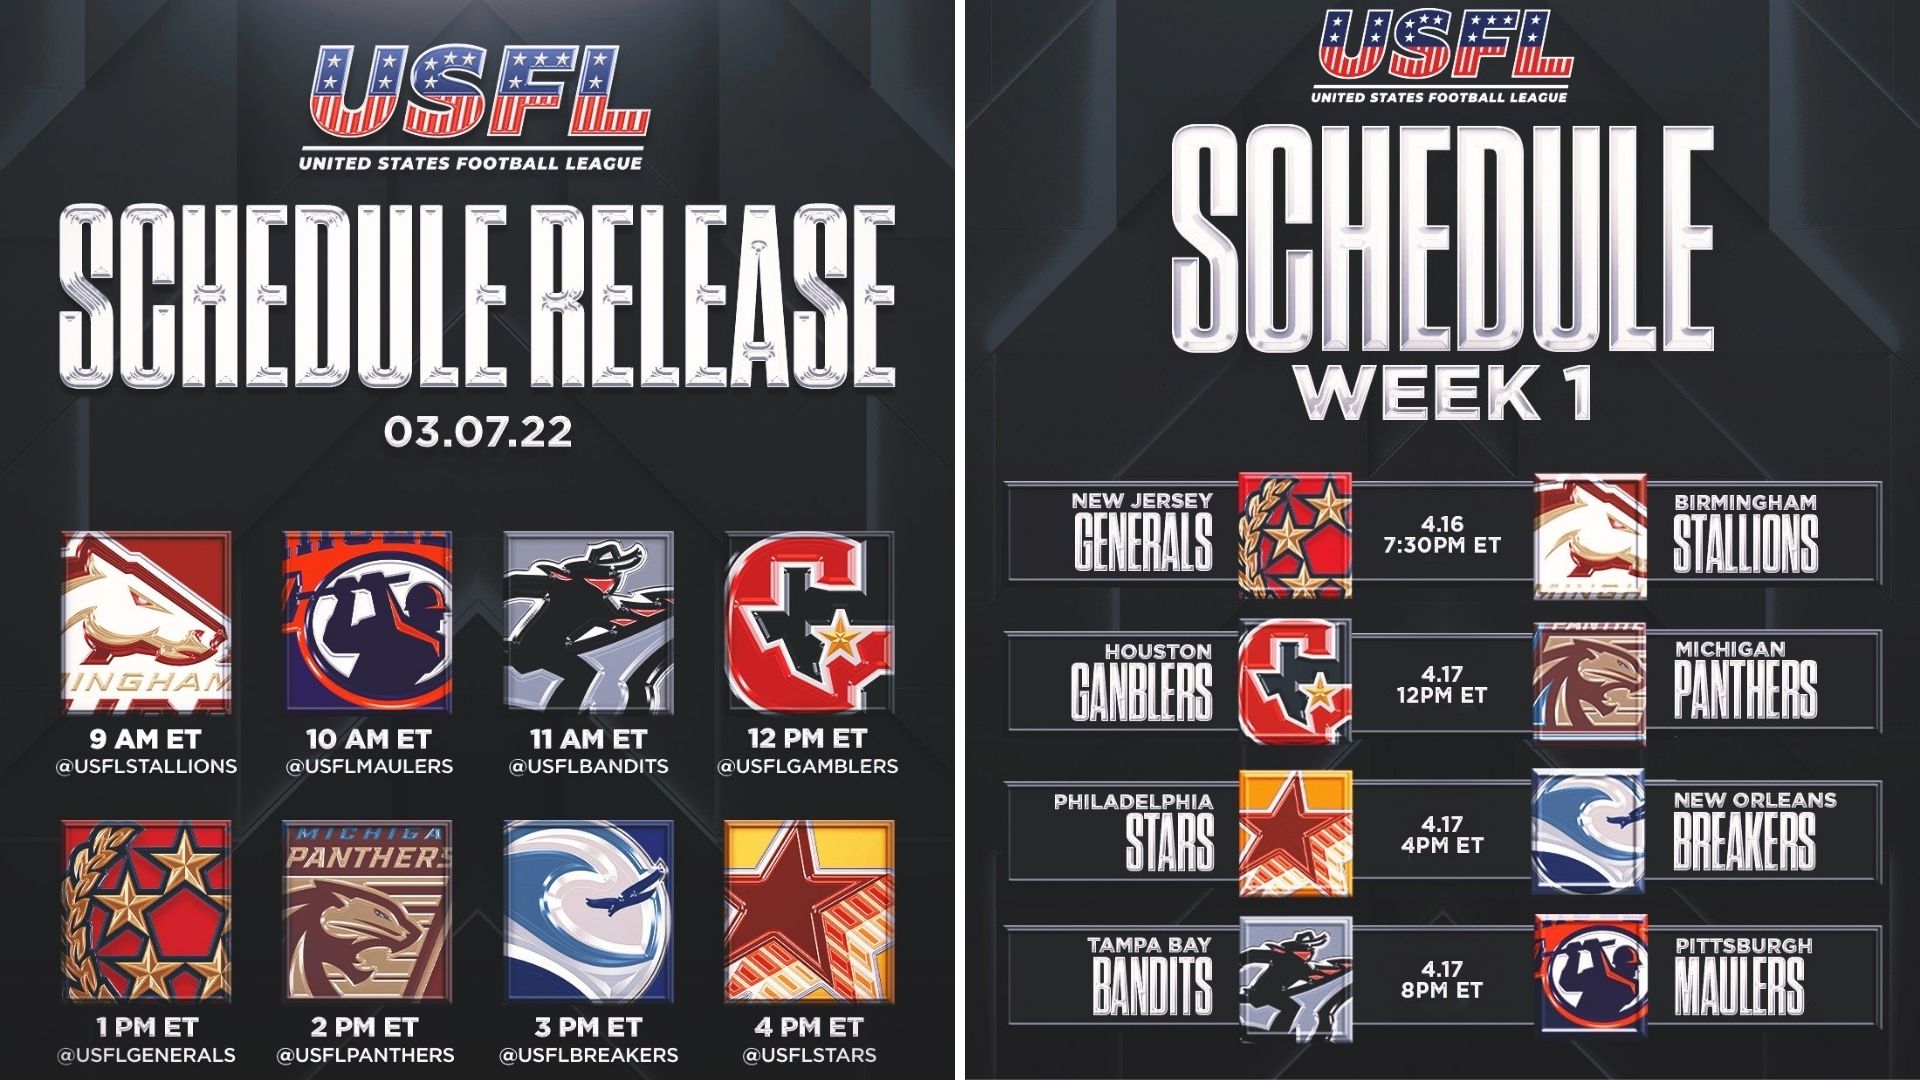 USFL Week 1 Schedule Includes Sunday TripleHeader, With Prime Time Game